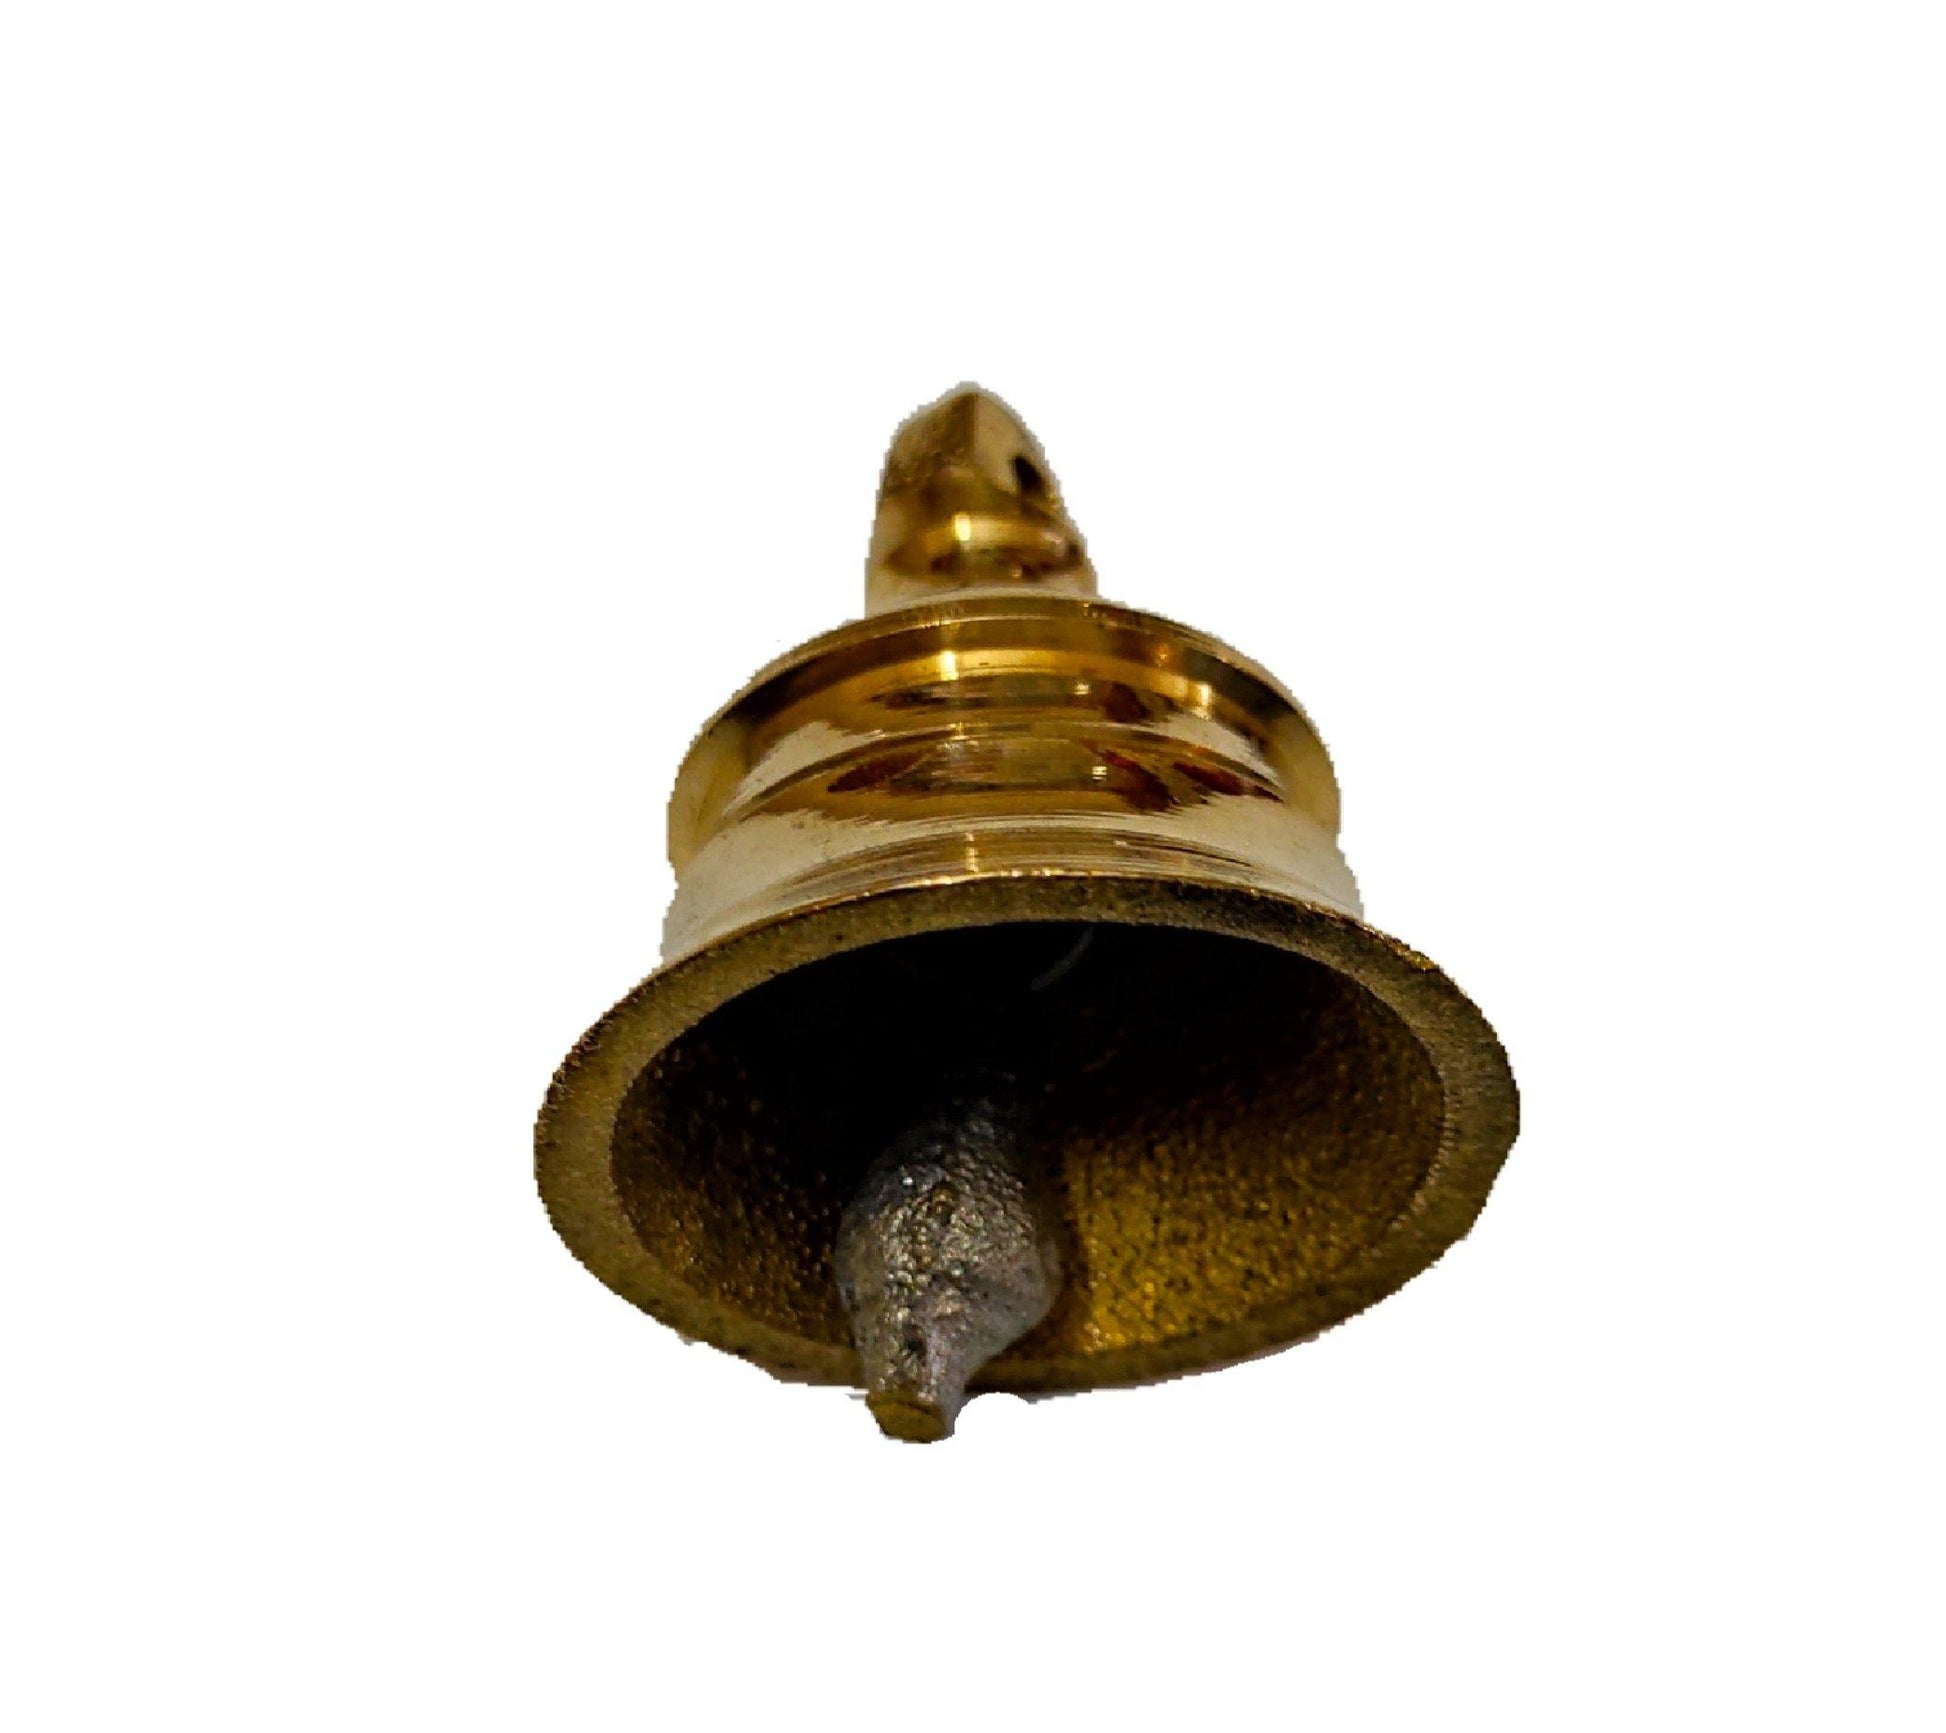 Brass Hanging Bell | Hanging Bell For Puja | PoojaProducts